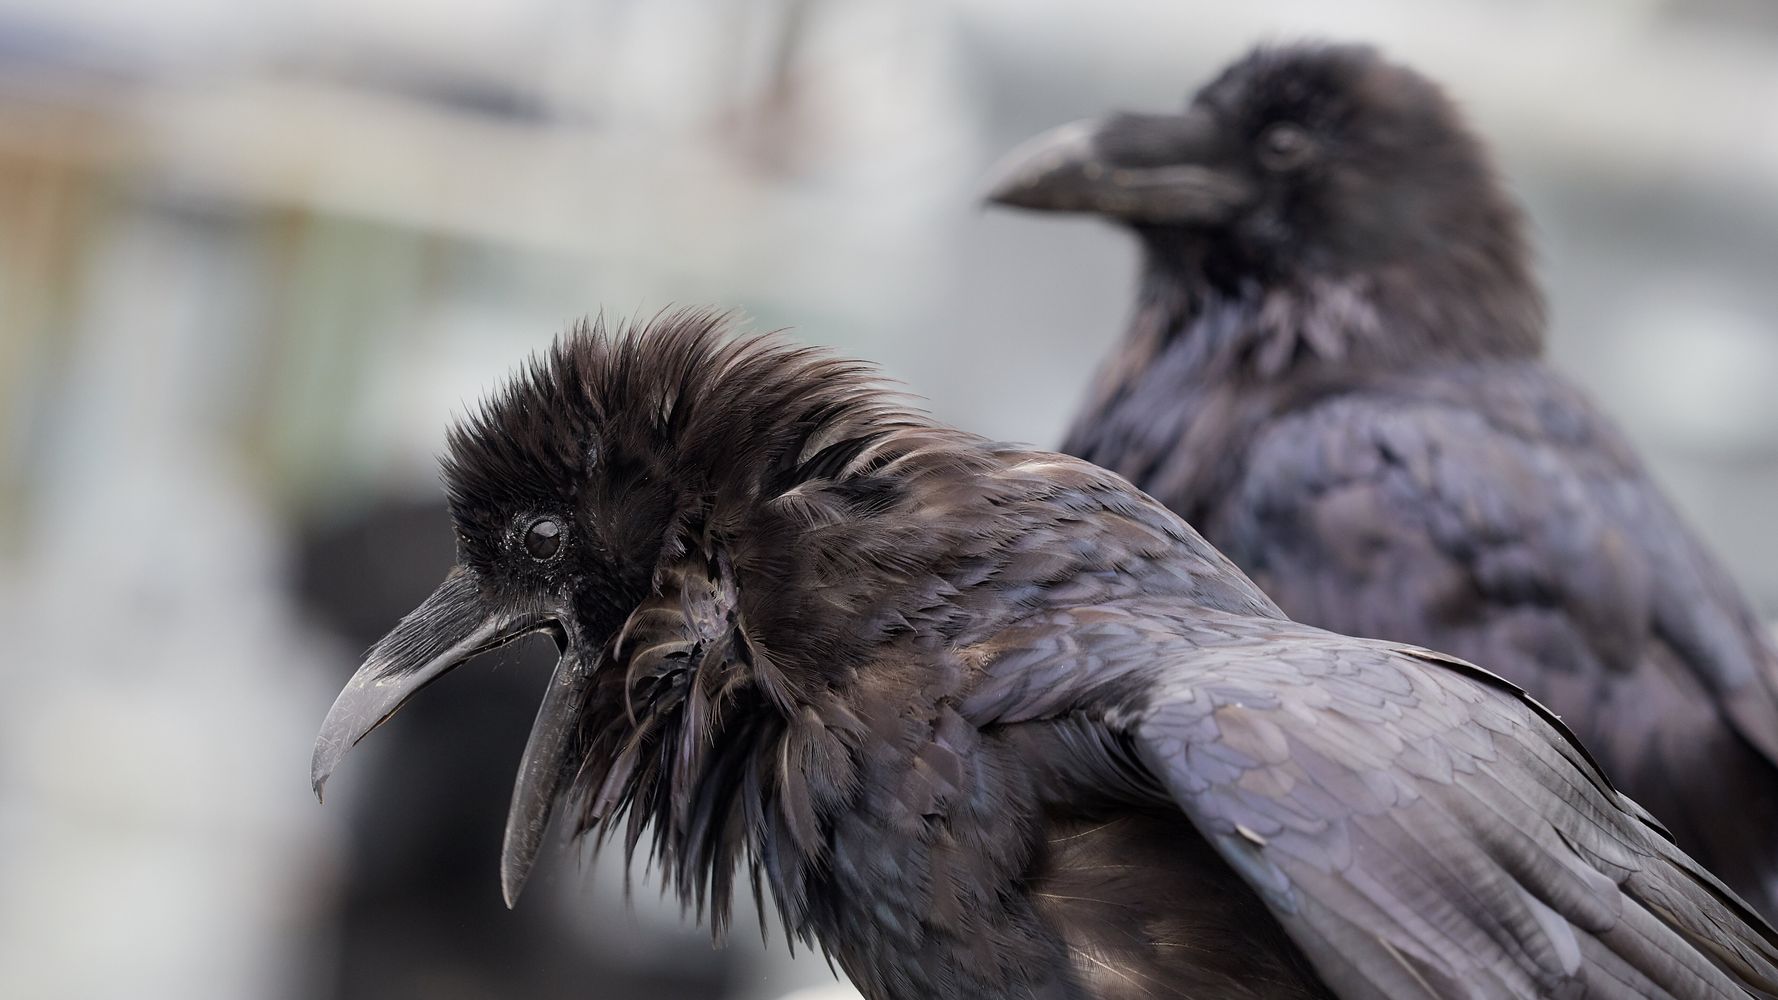 Alaska Costco shoppers say crows steal their food